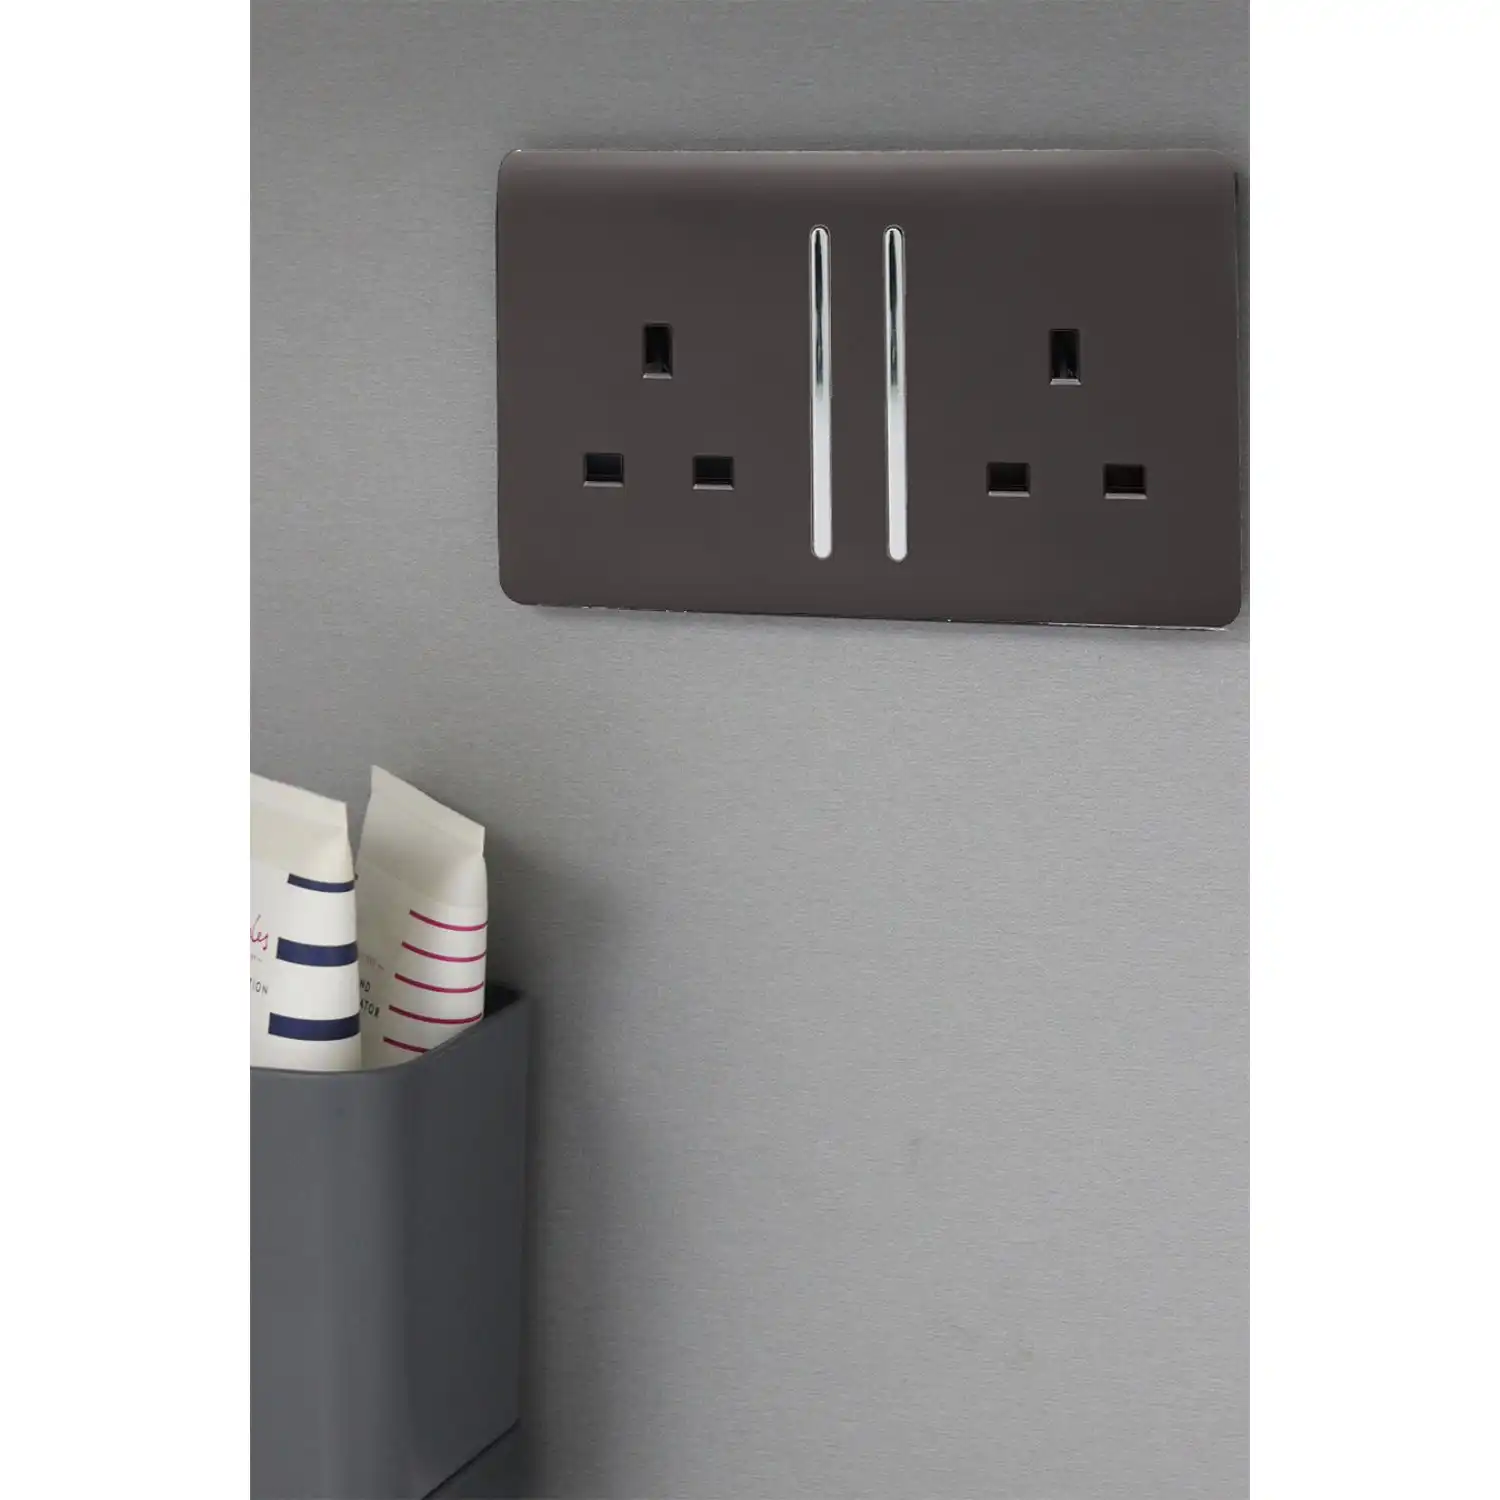 Trendi, Artistic Modern 2 Gang 13Amp Long Switched Double Socket Dark Brown Finish, BRITISH MADE, (25mm Back Box Required), 5yrs Warranty